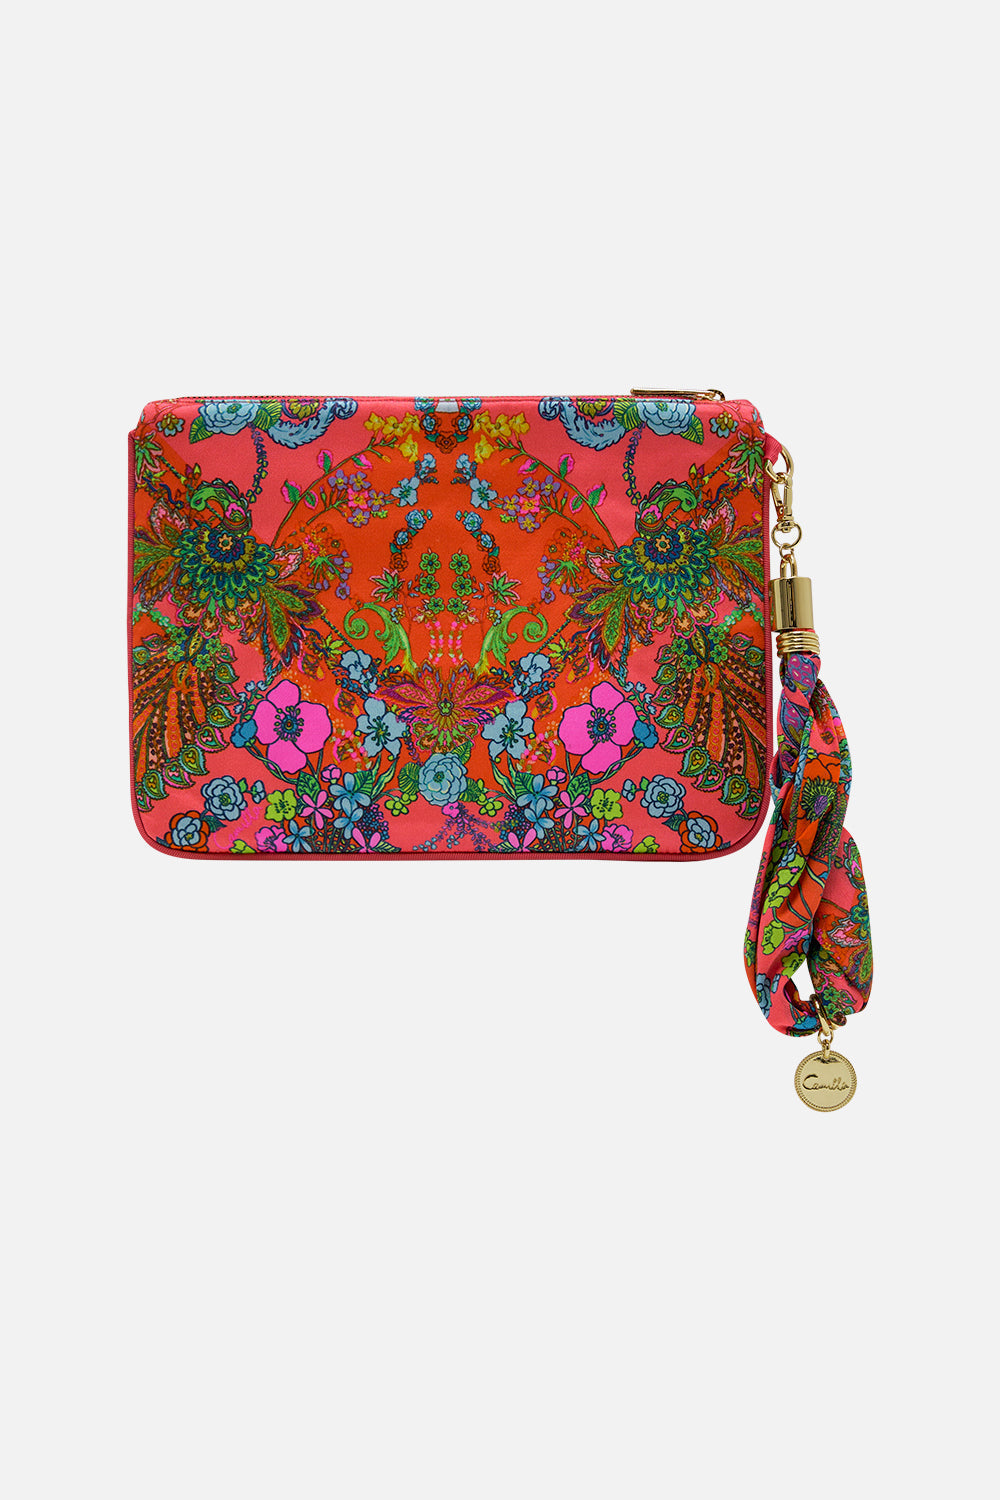 CAMILLA pink scarf clutch in Windmills and Wildflowers